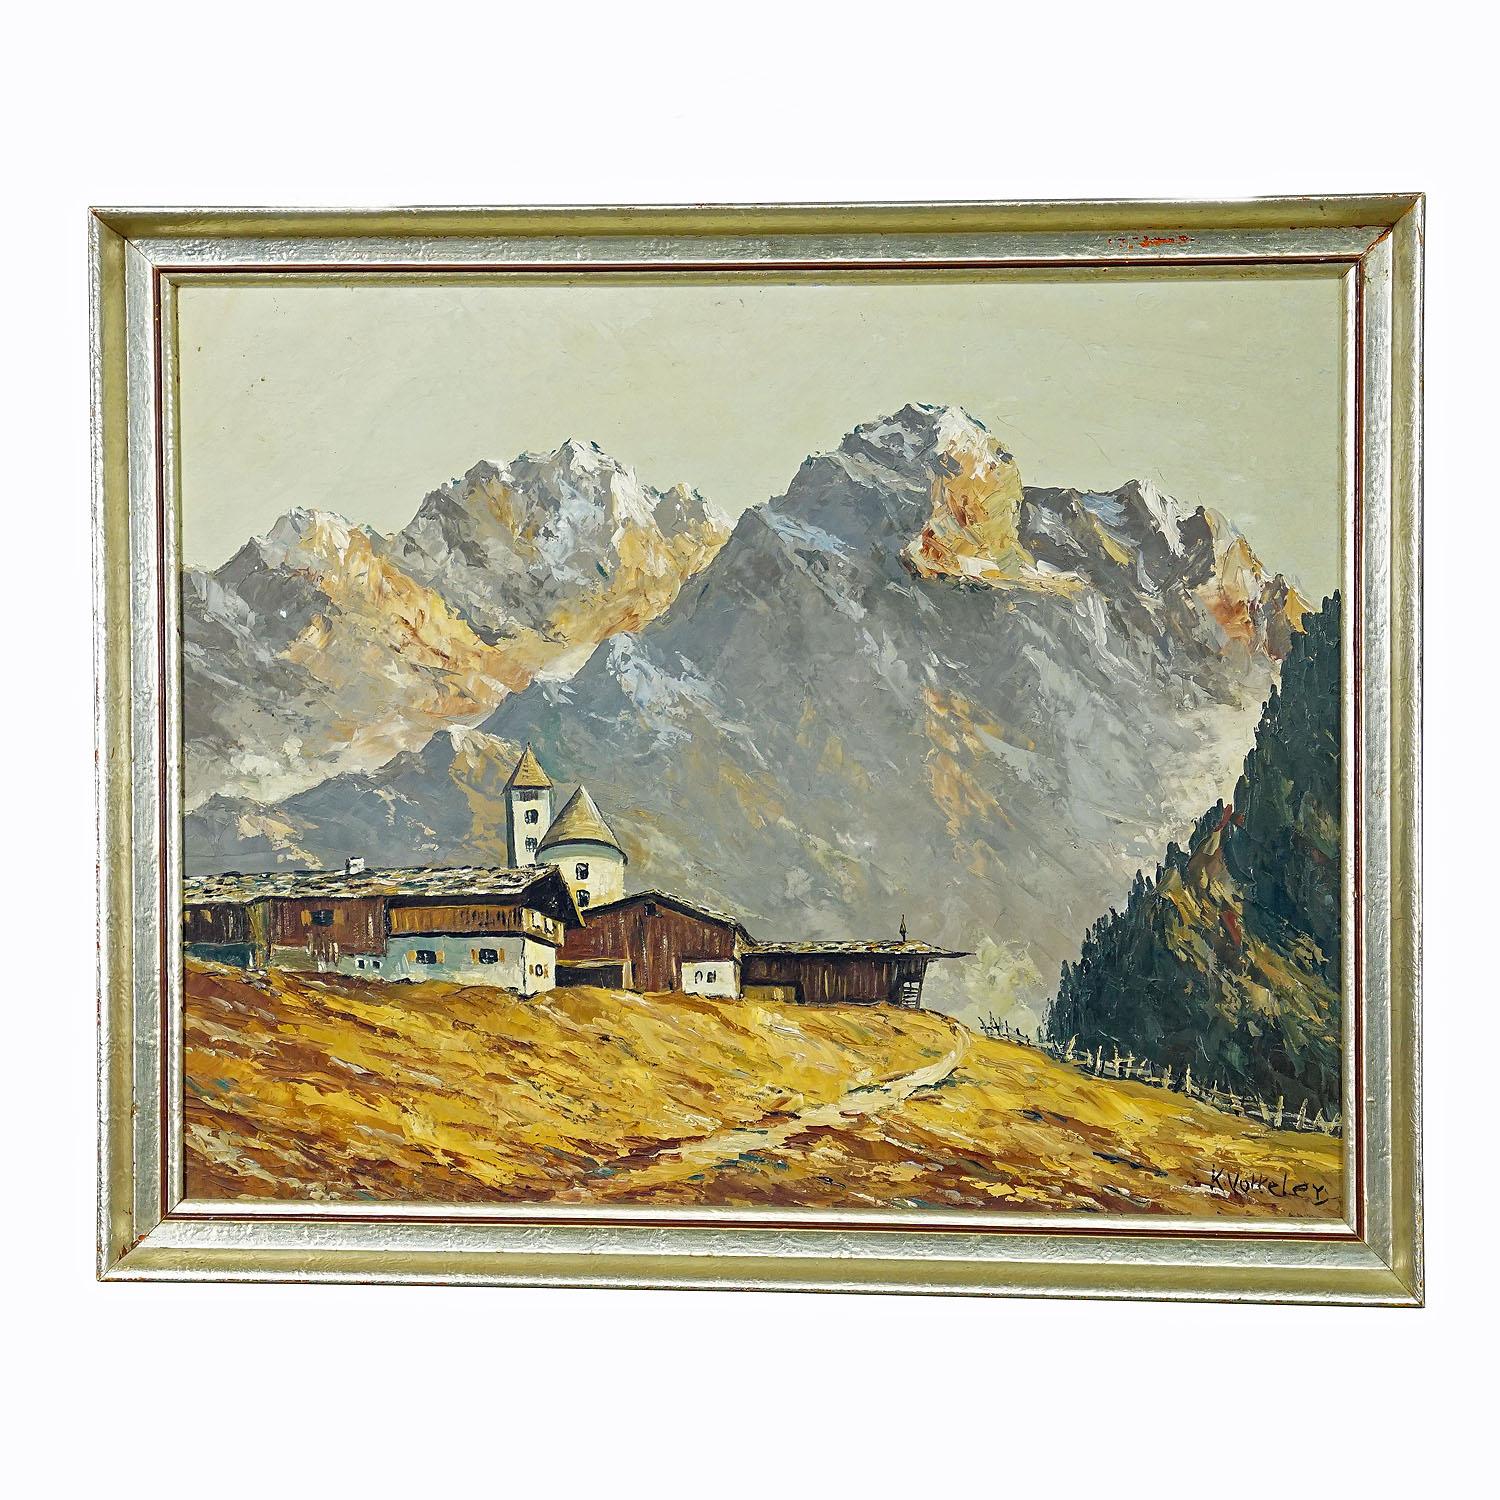 Alpine Landscape Oil Painting with Tyrolian Mountain Village

A large vintage oil painting depicting an Alpine landscape with Tyrolian mountain village. Painted on cardboard with pastell colors. Framed with antique decorative gilded frame. On the